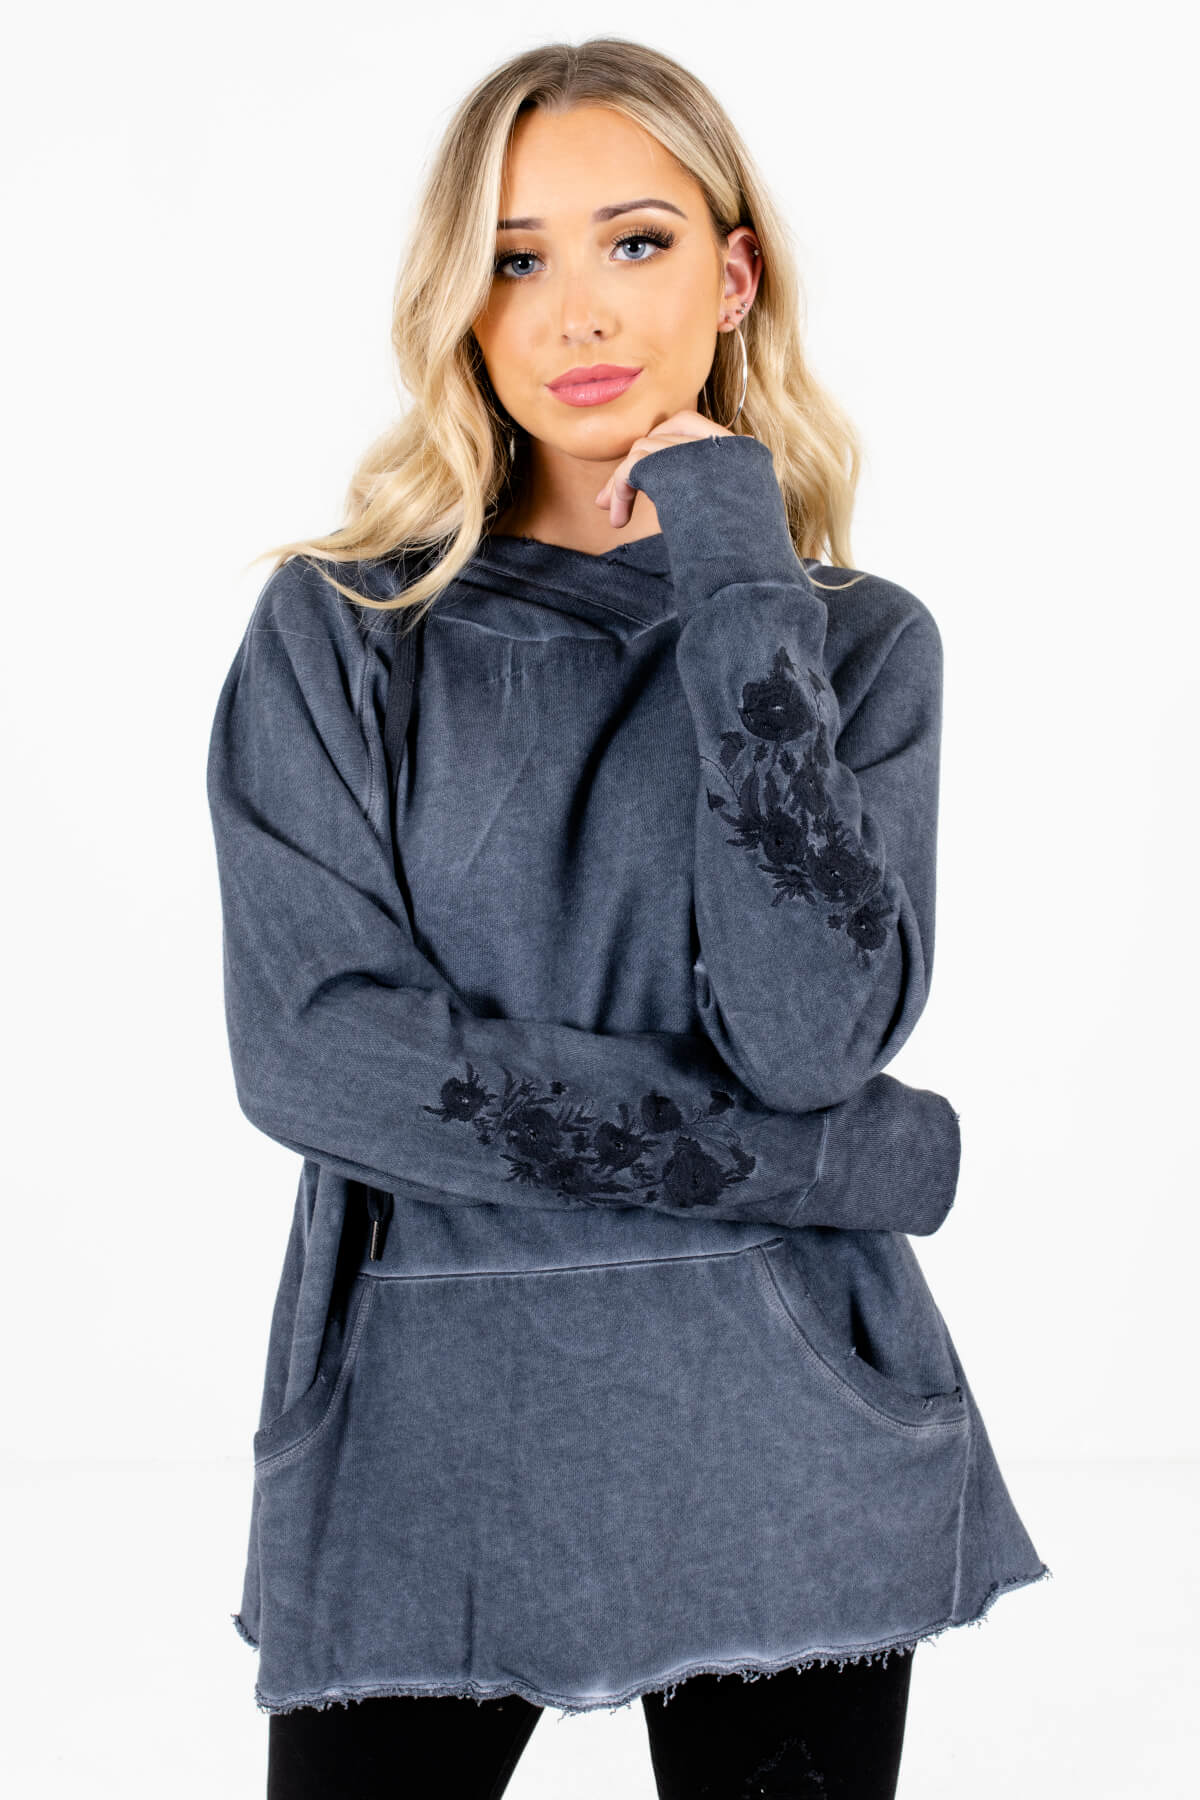 Women's Navy Blue Warm and Cozy Boutique Hoodies